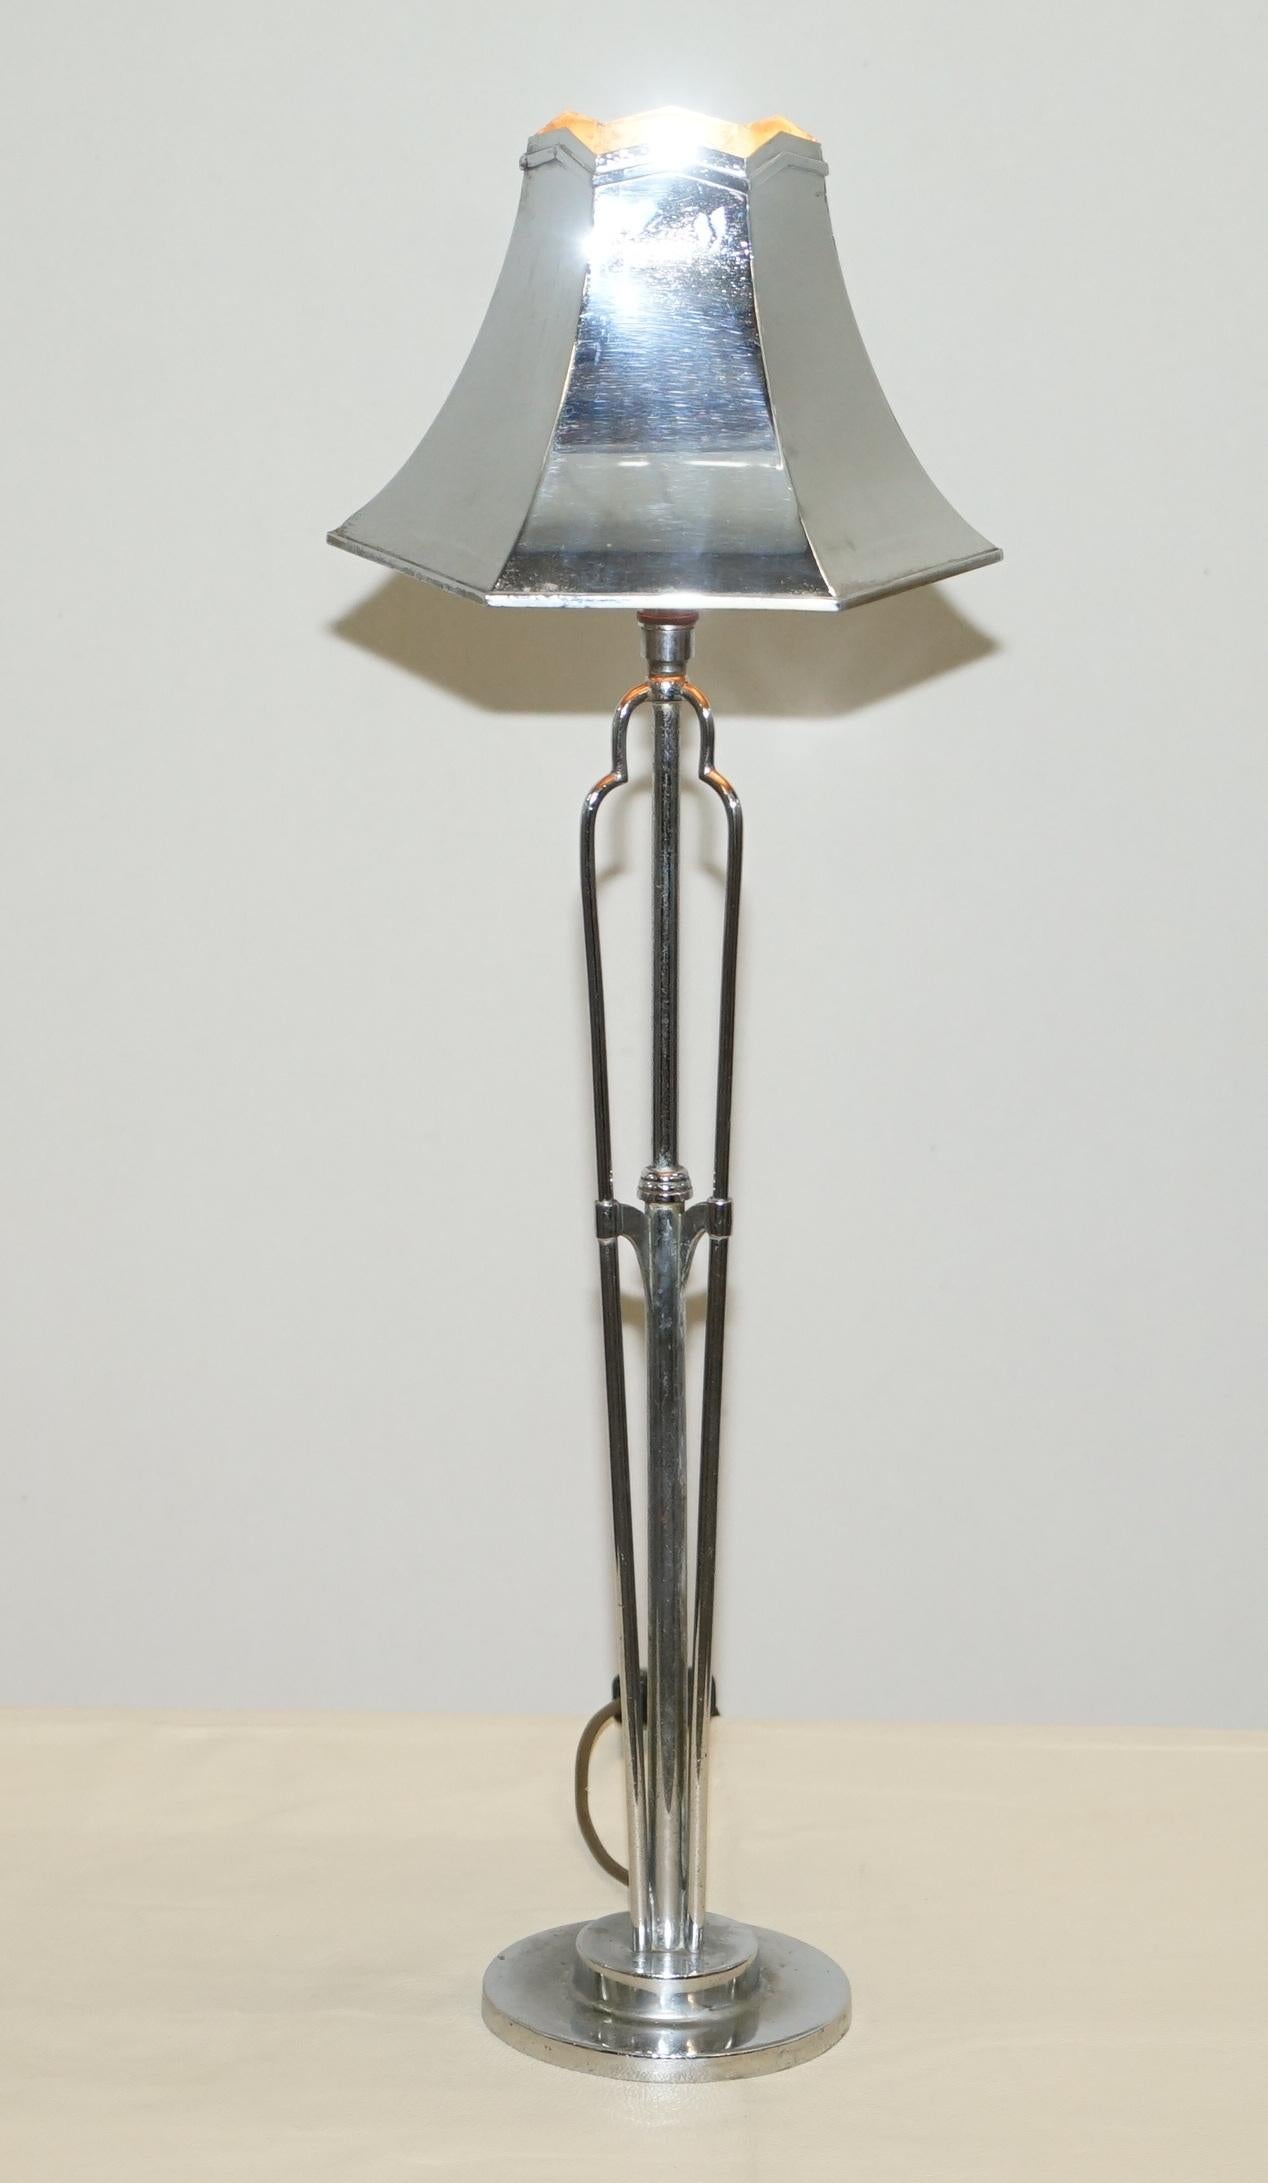 We are delighted to offer for sale this sublime pair of side table lamps, chromed metal, made by Tucker & Edgar Ltd London, designed by Miss Elsie Roberts in the studio of Oswald Milne for Claridges Hotel, ca.1932

A very rare a well made pair, they